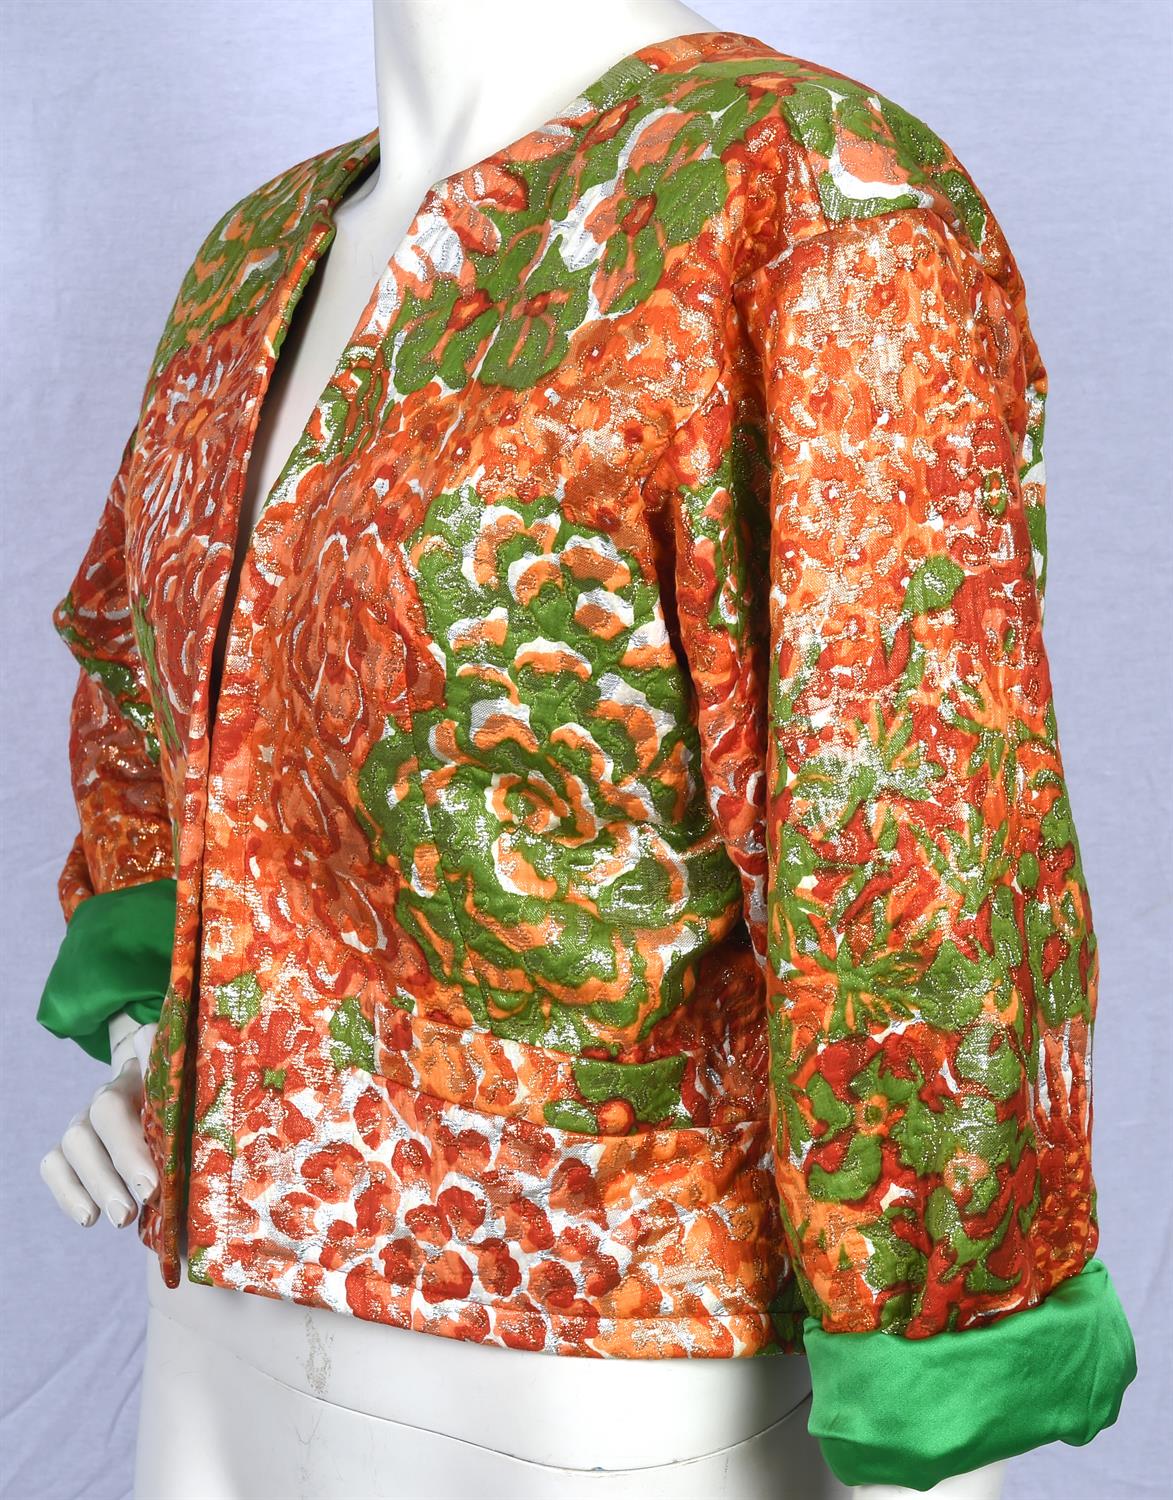 YVES SAINT LAURENT Rive Gauche vintage 1980s/90s orange and green jacket with green silk lining - Image 4 of 7